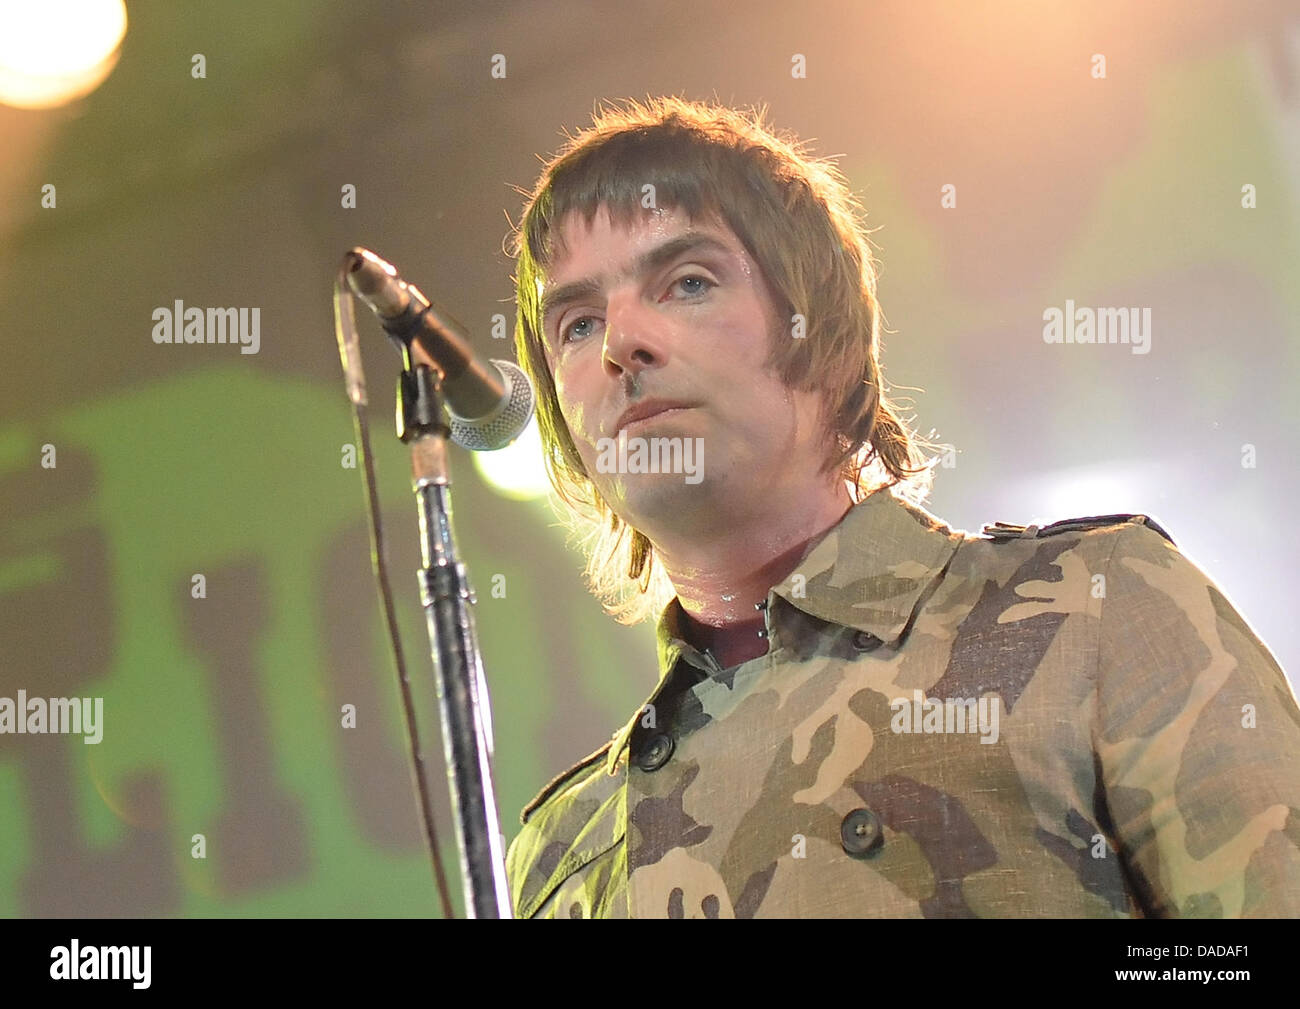 Singer Liam Gallagher of the British band Beady Eye gives a concert at the Columbiahalle in Berlin, Germany, 14 October 2011. The last four members of the band Oasis are now part of the rock band Beady Eye. Photo: Britta Pedersen Stock Photo